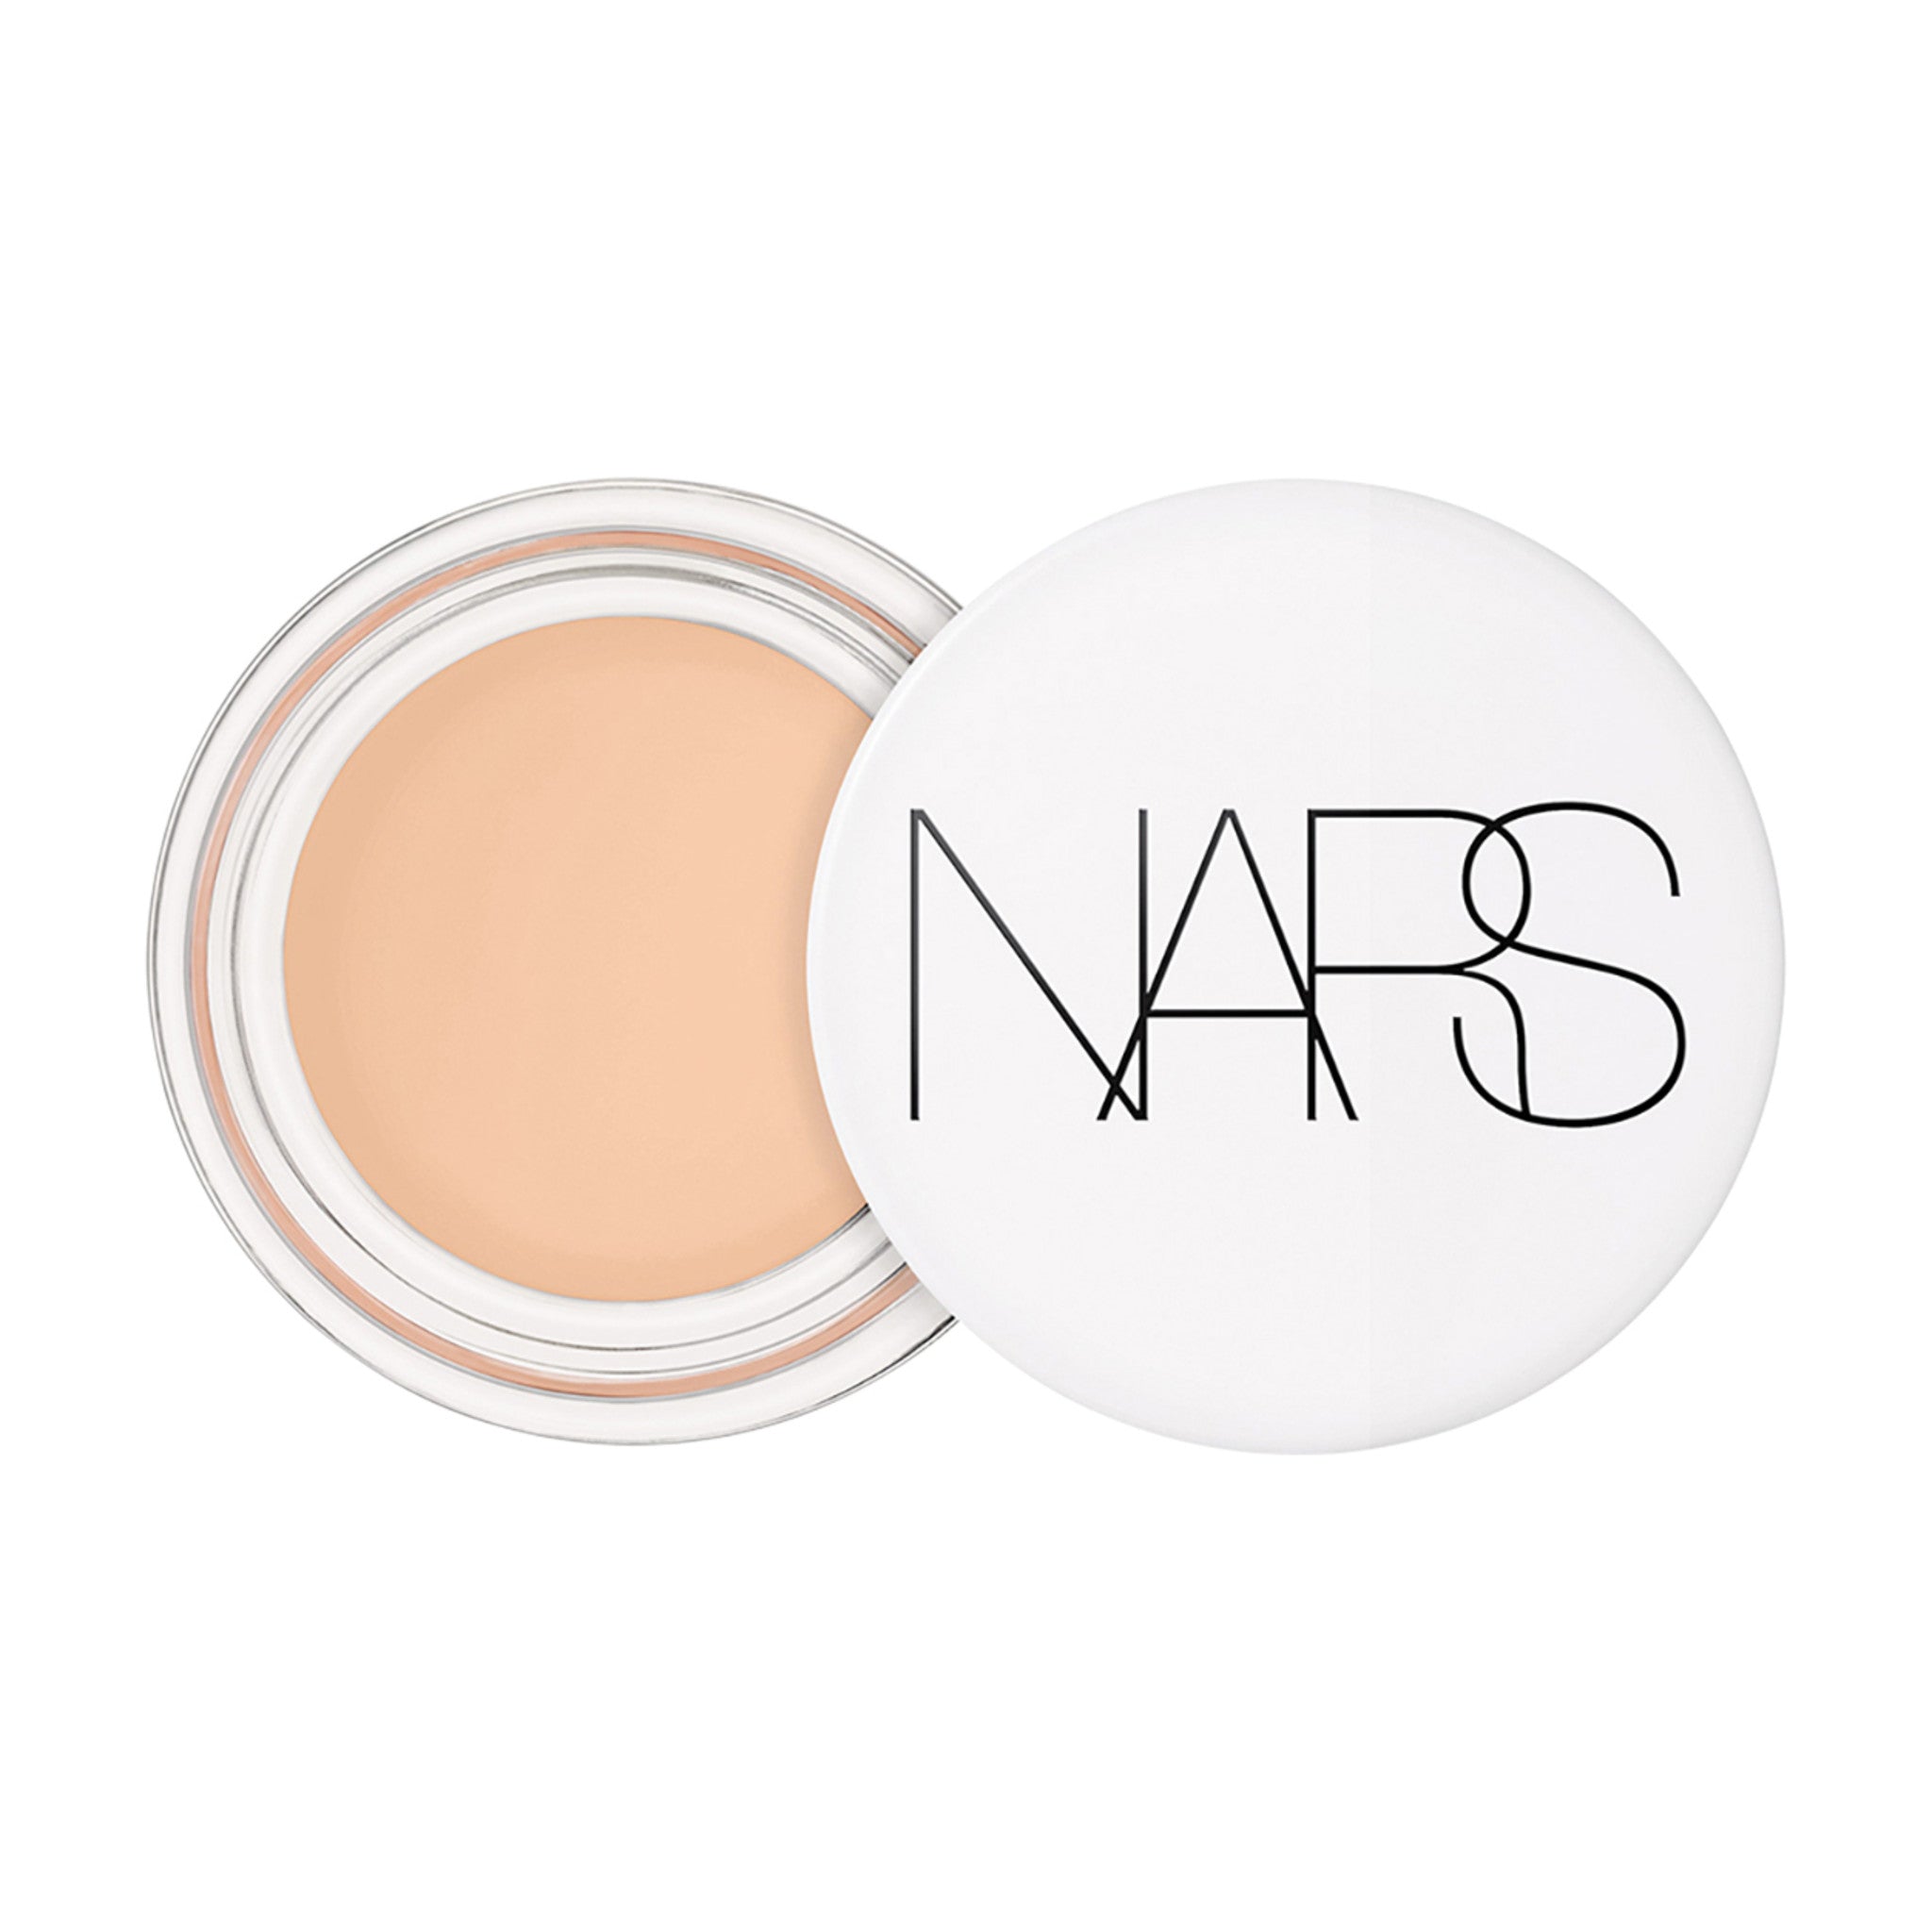 Nars Light Reflecting Eye Brightener Color/Shade variant: Night Swan main image. This product is for light complexions